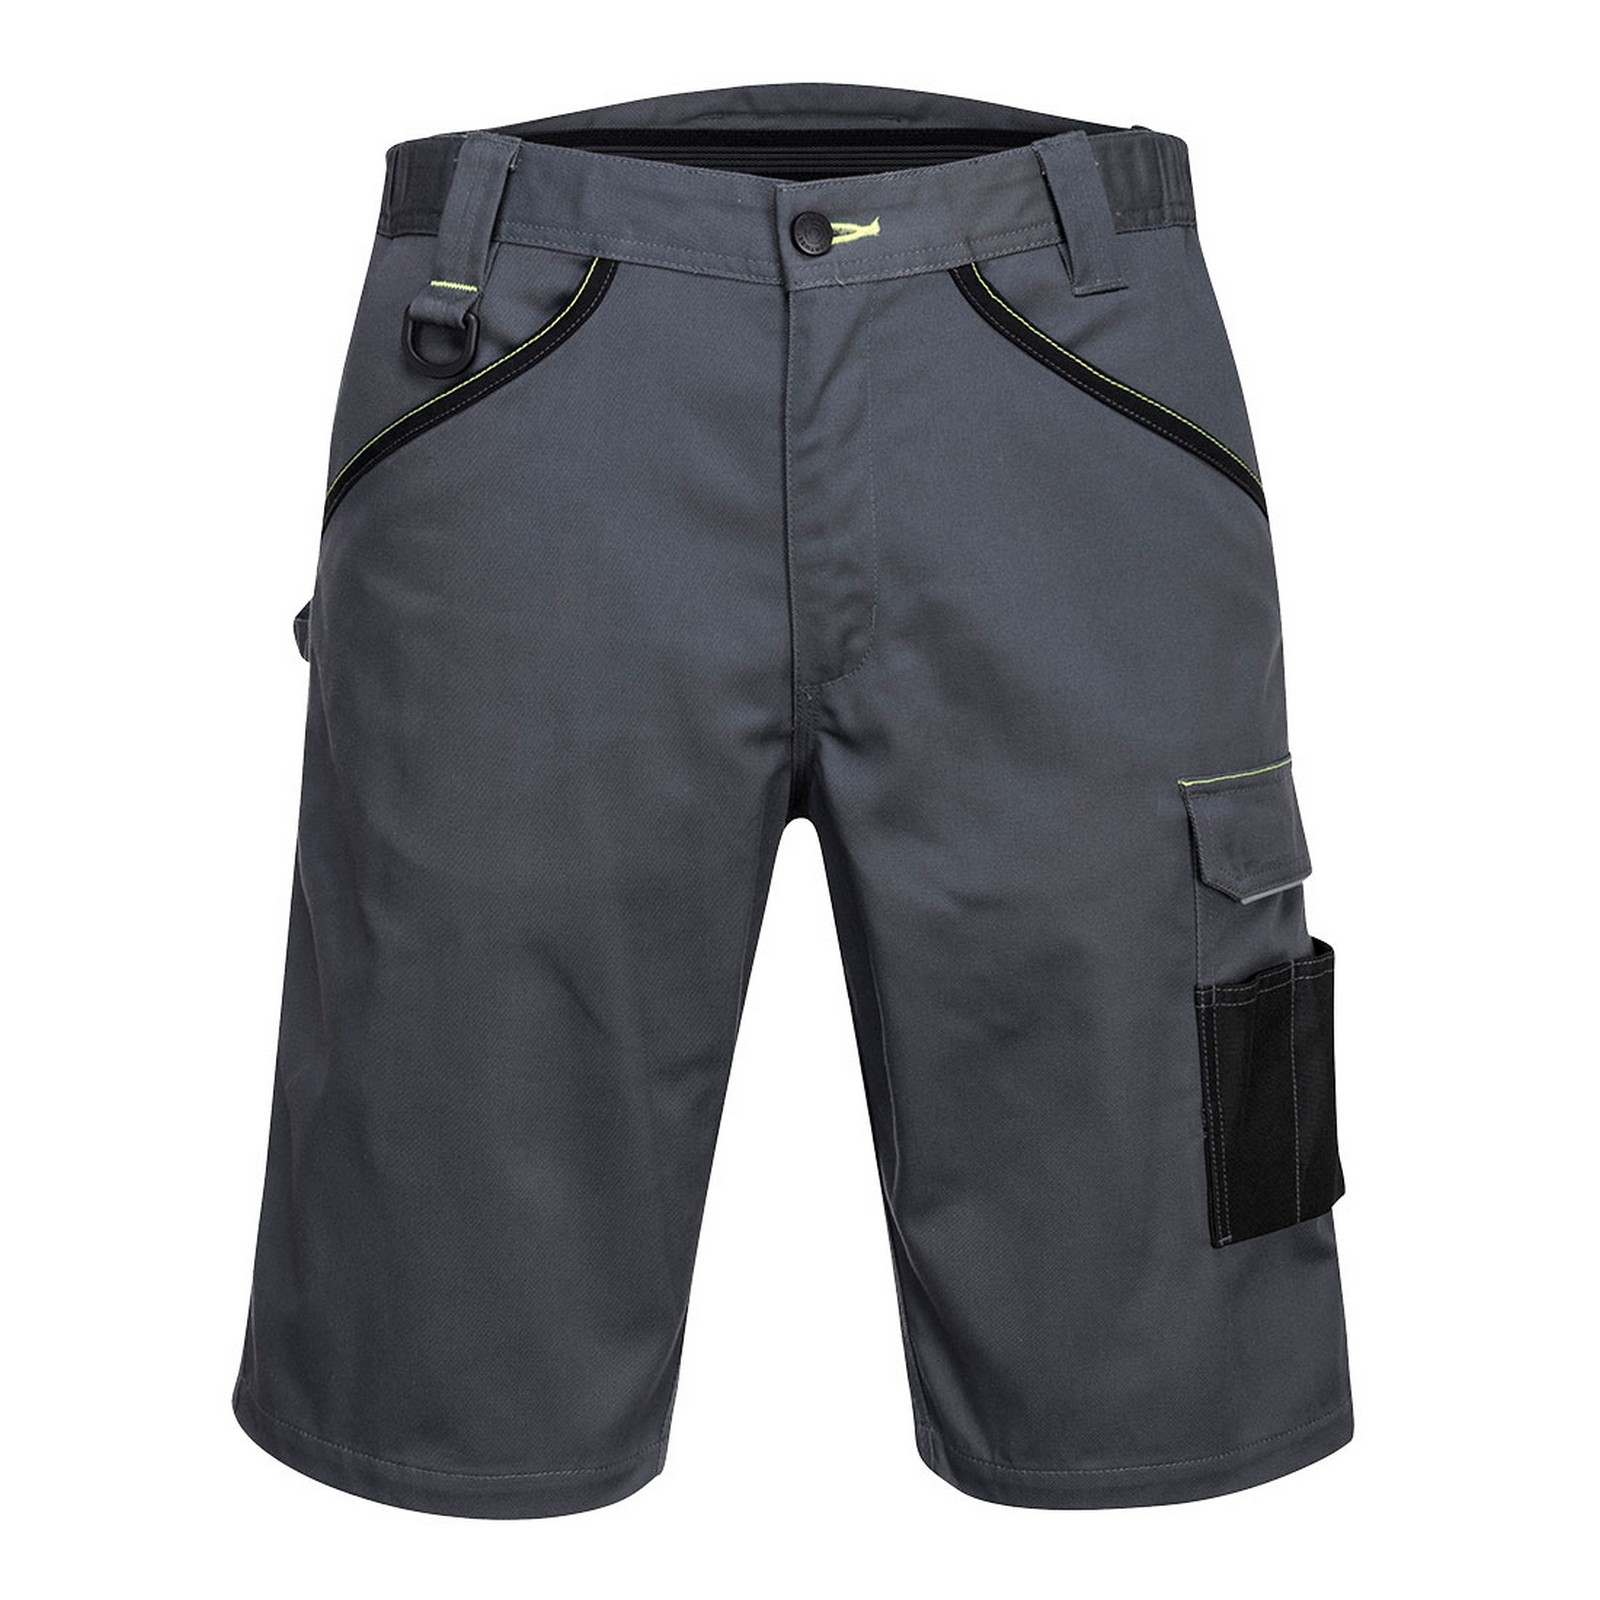 Work shorts with multi-functional pockets | WISE Worksafe